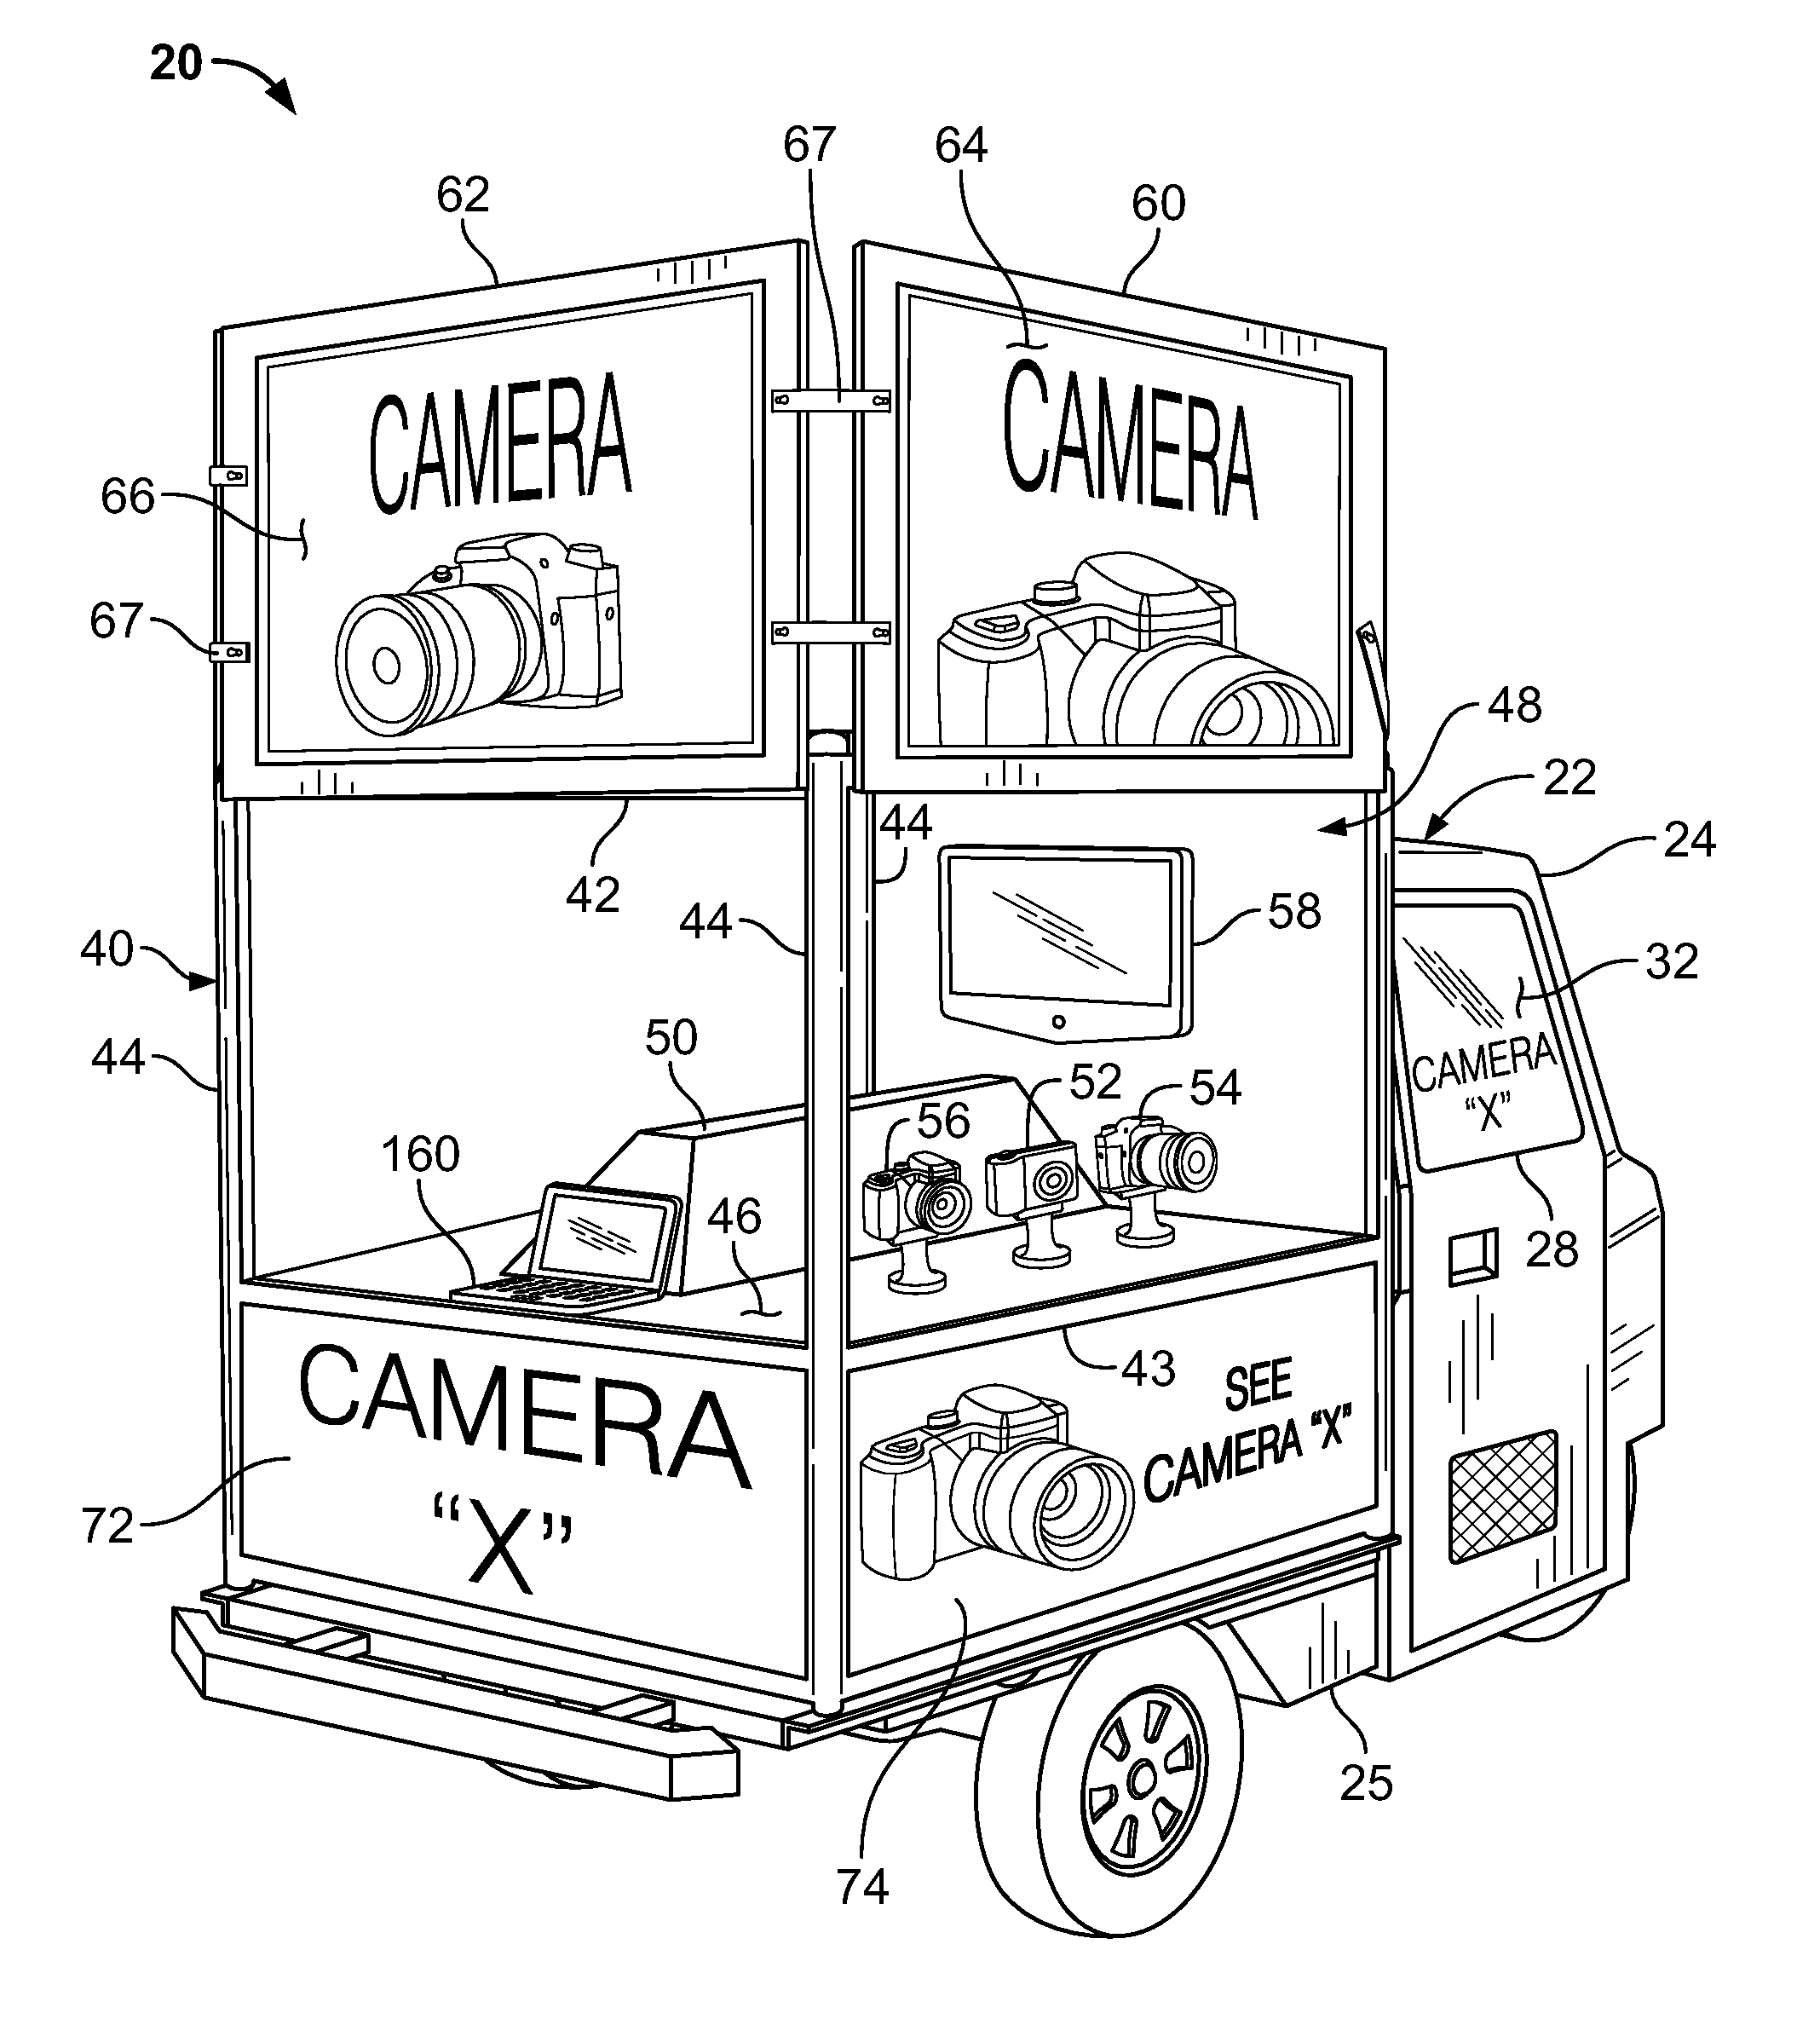 Method and Apparatus for Selling Consumer Products